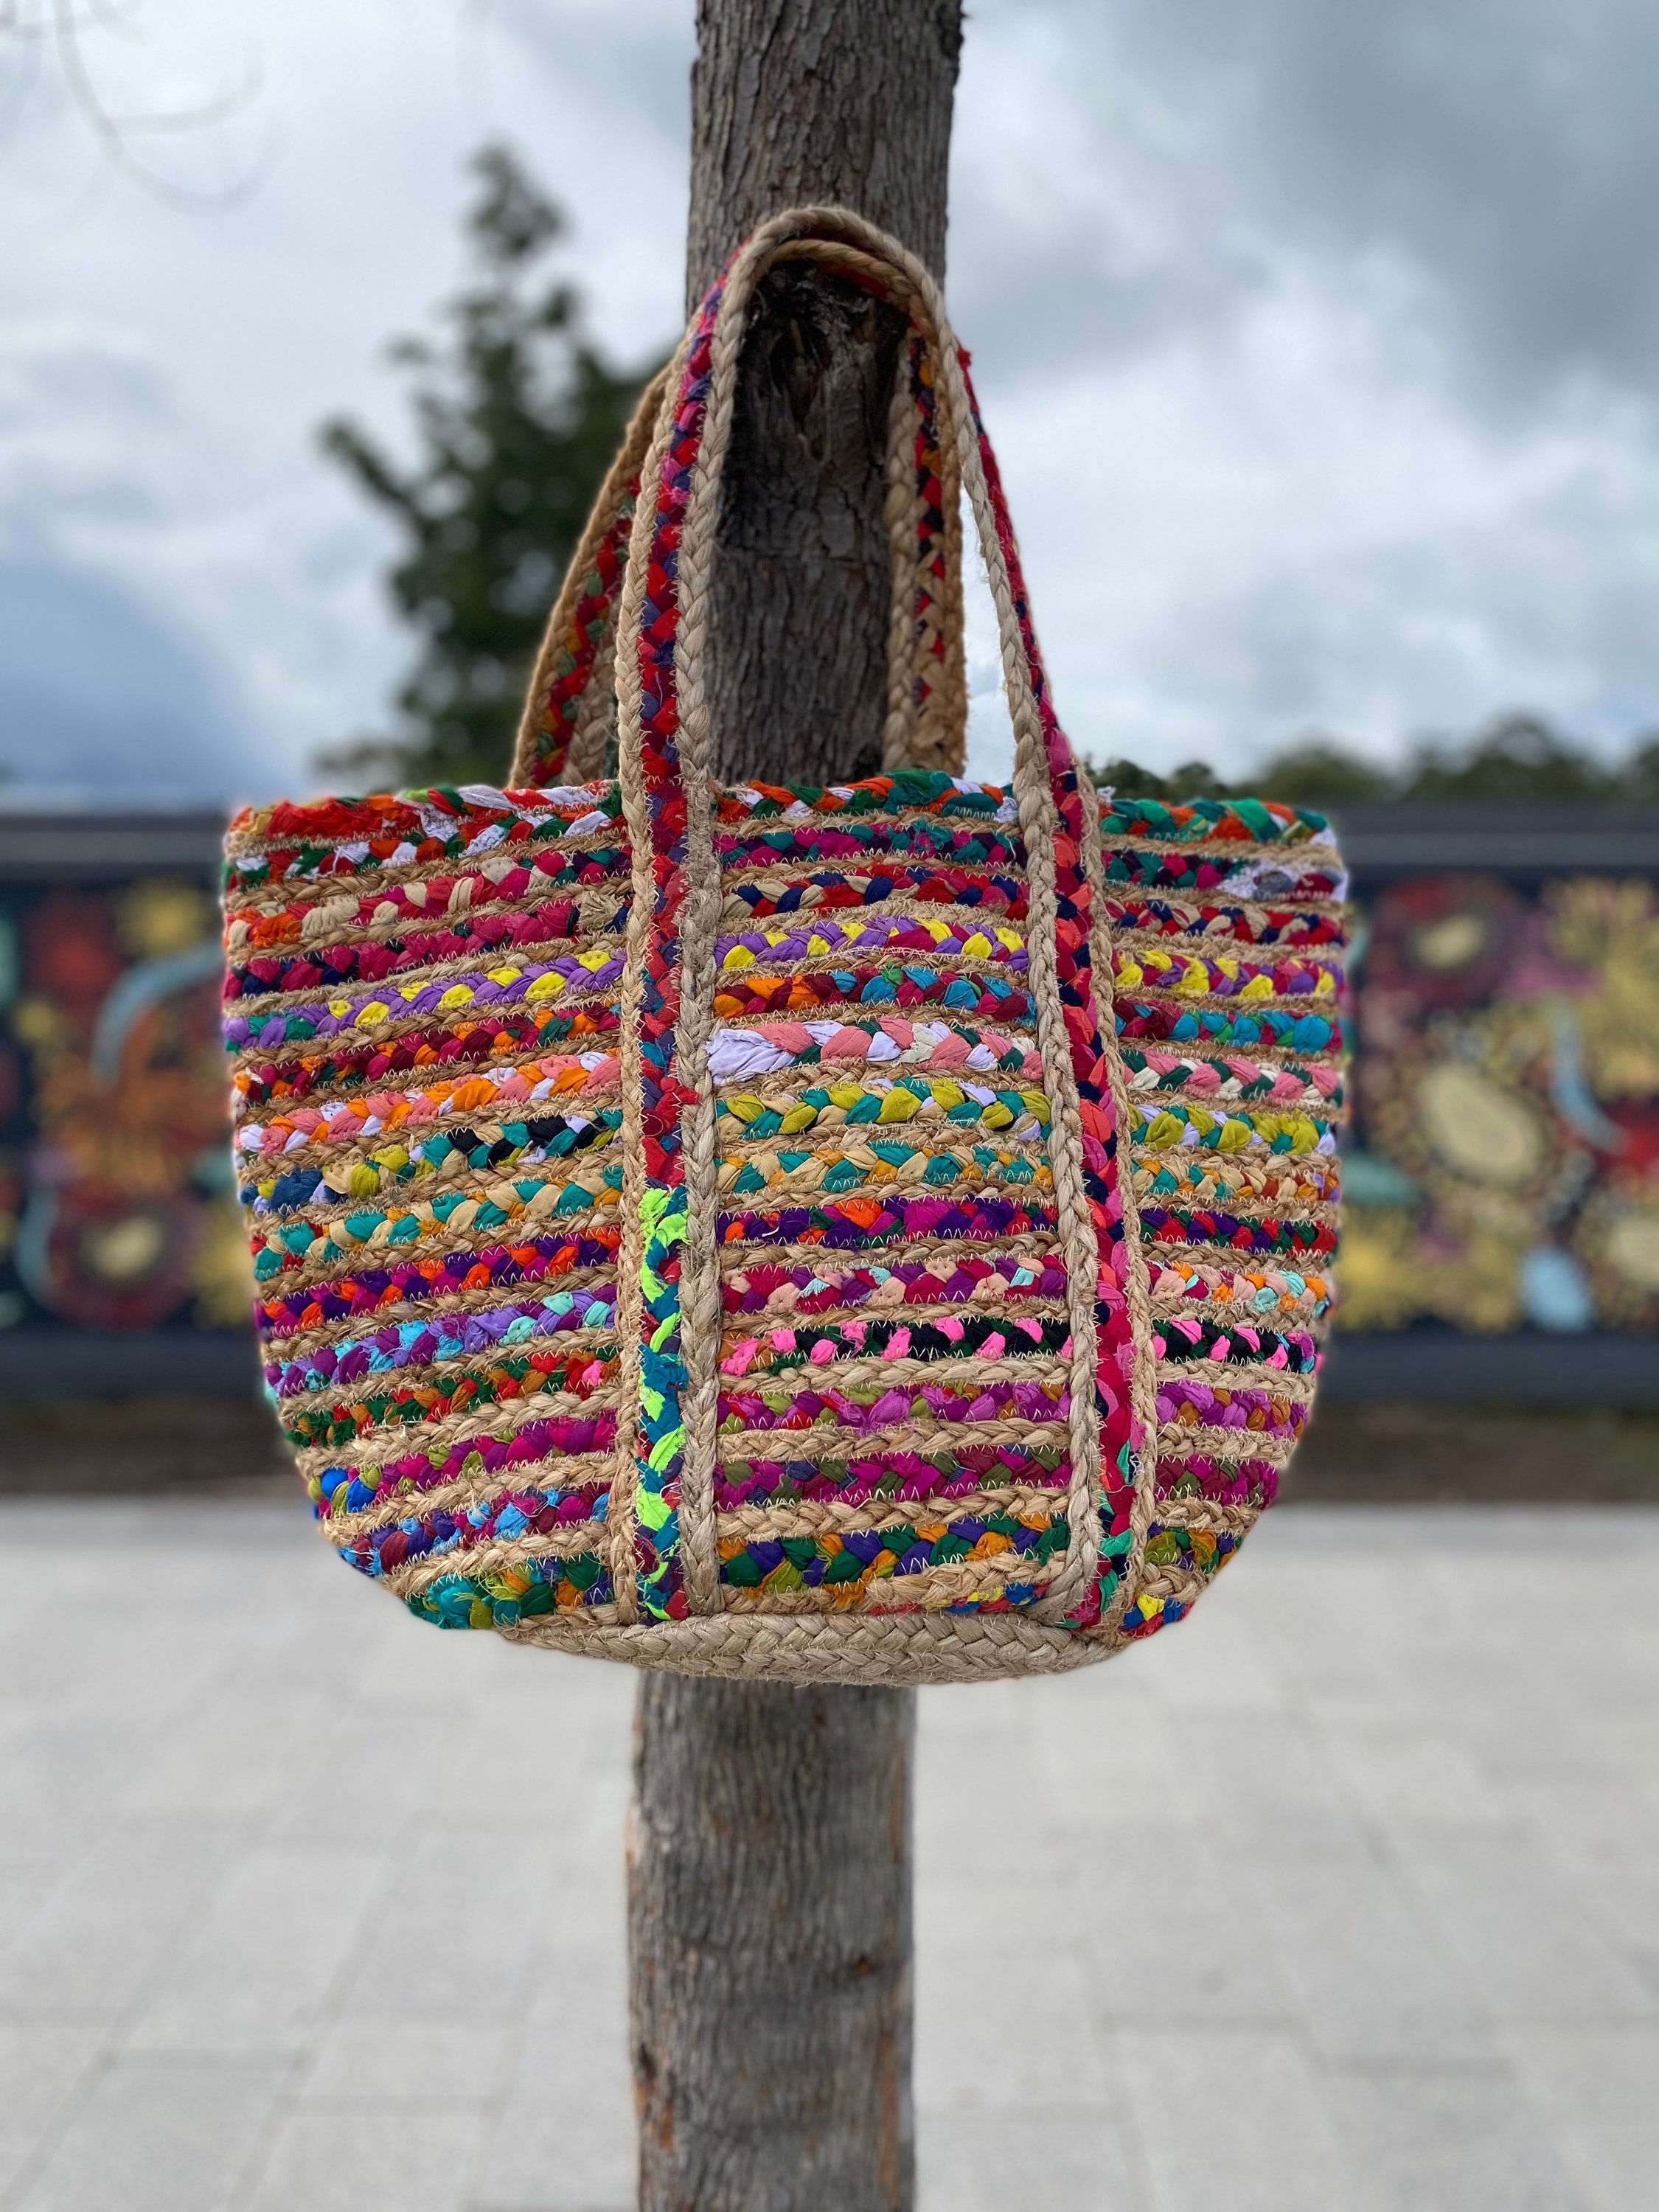 Upcycled Plastic Tote Bags Handmade in India Fair Trade Multiple